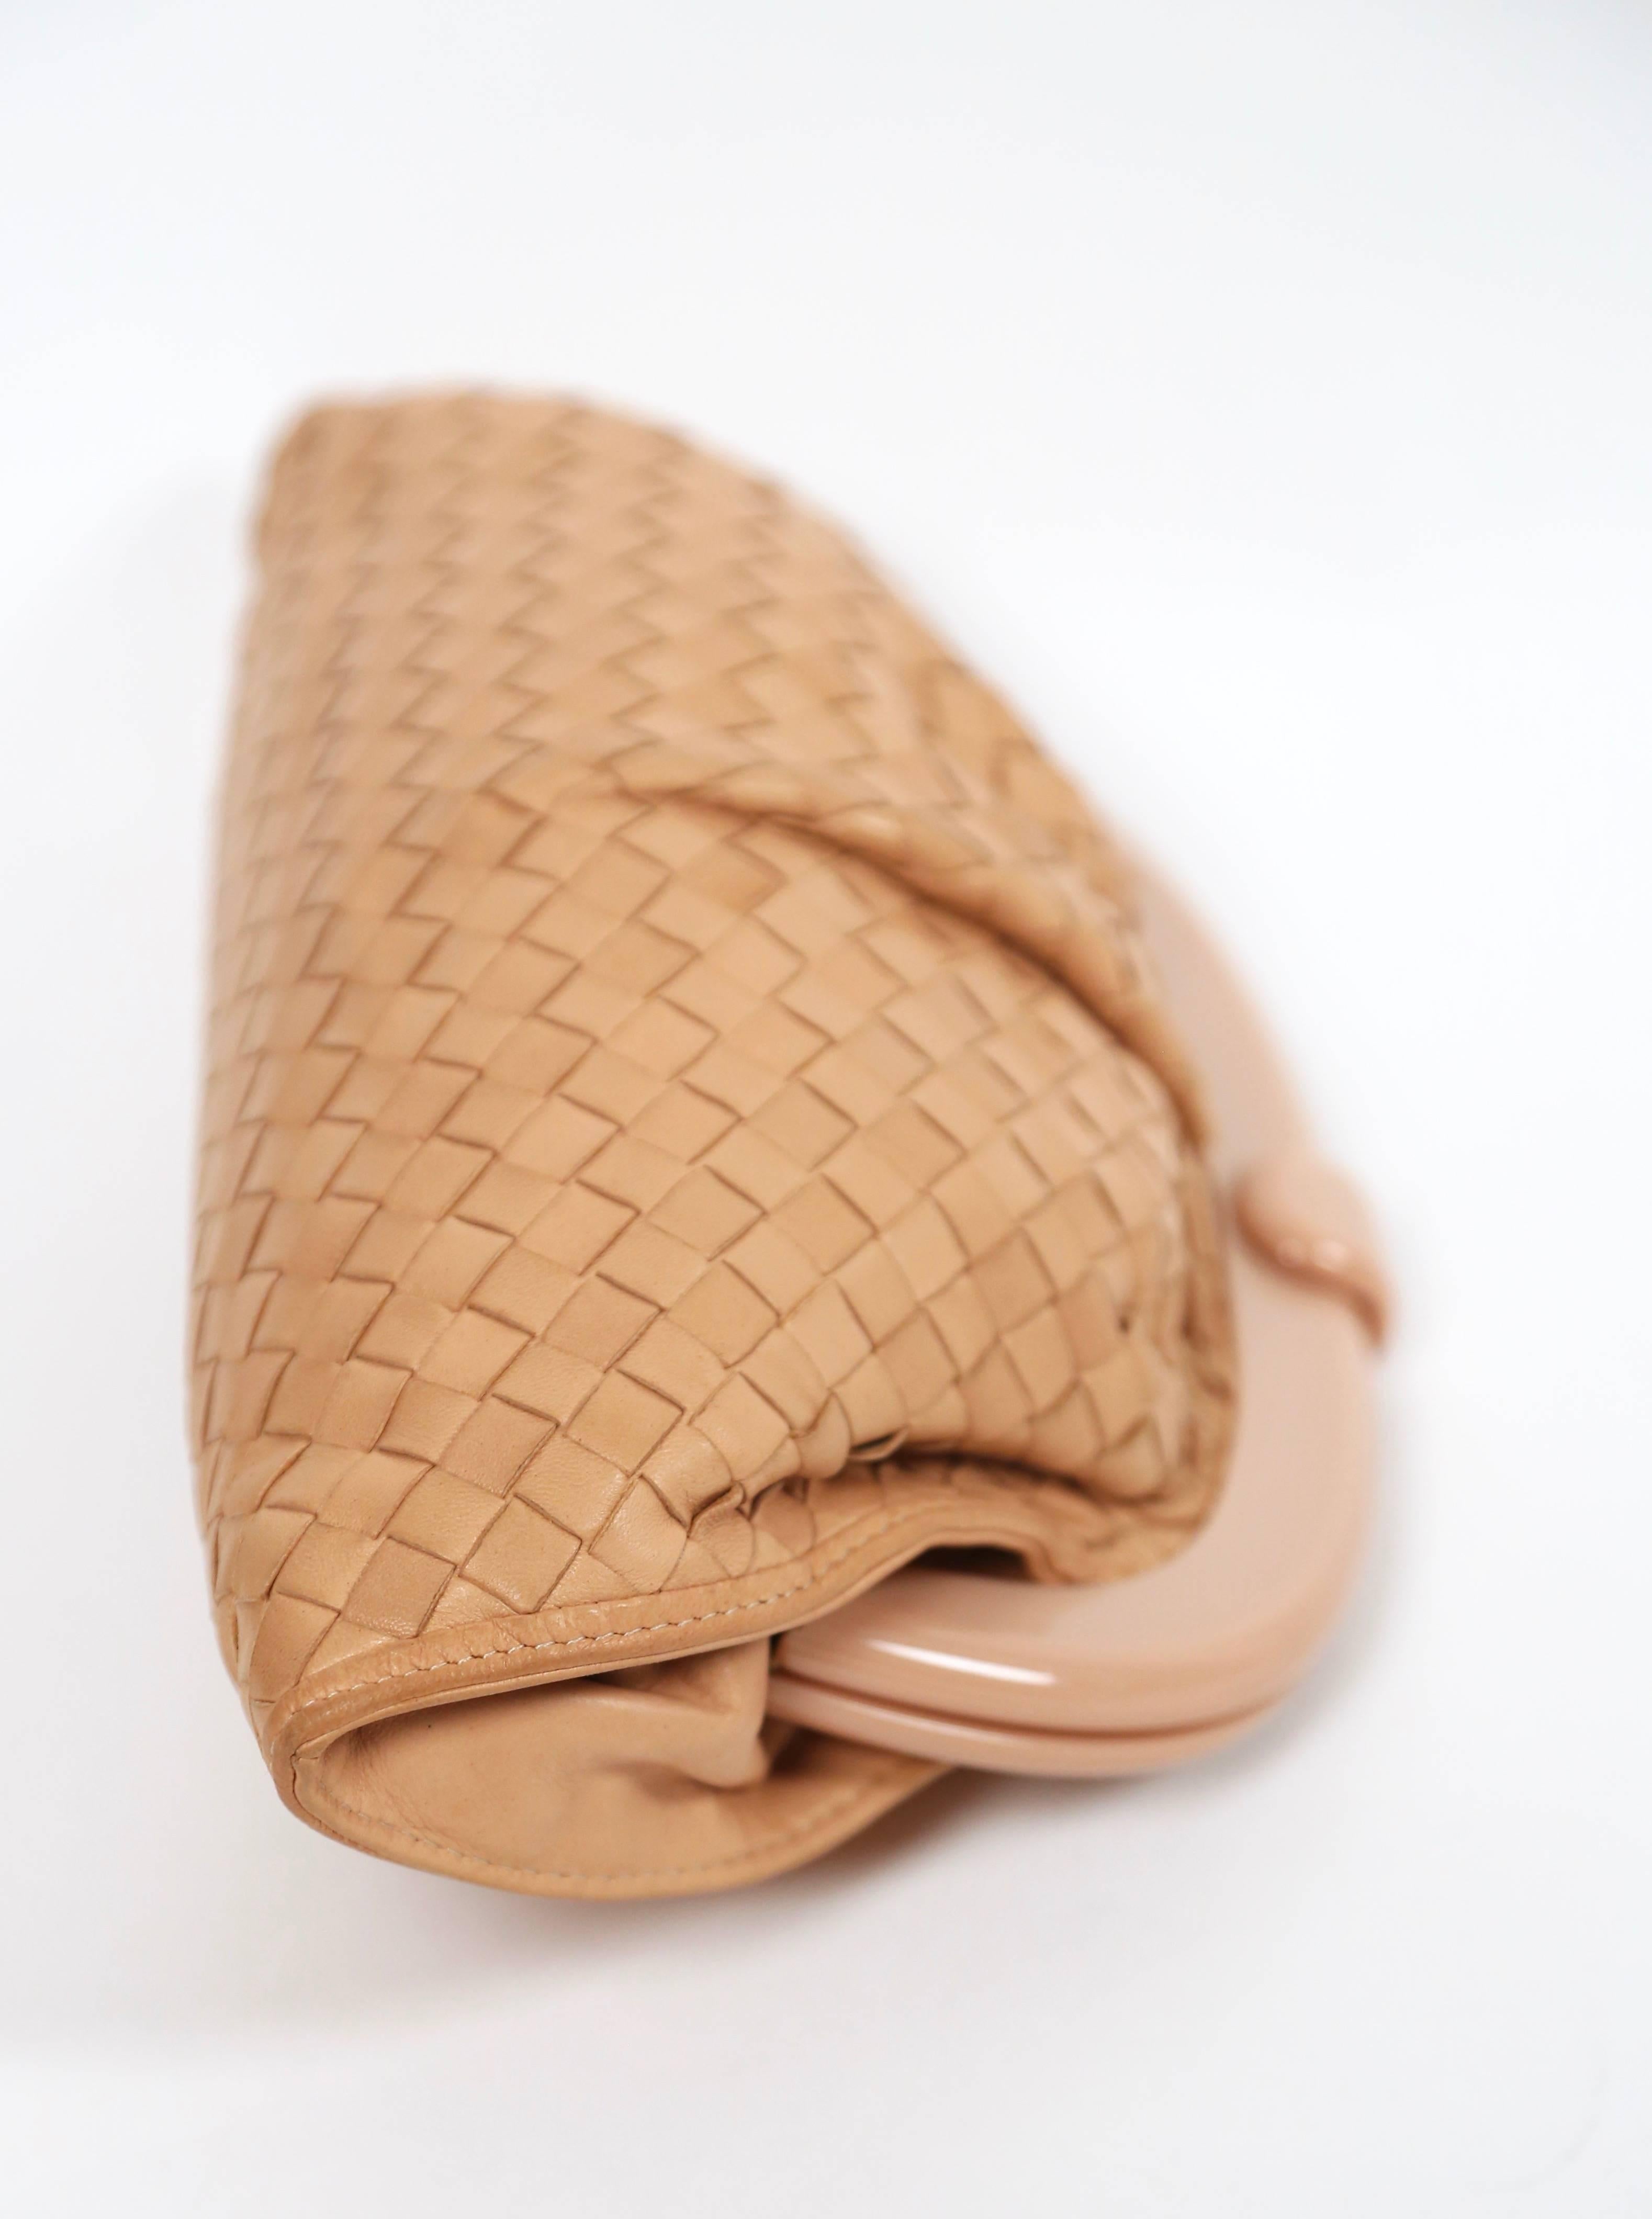 Blush woven leather clutch with lucite frame designed by Bottega Veneta dating to the 1980's. Approximate measurements: 11.5